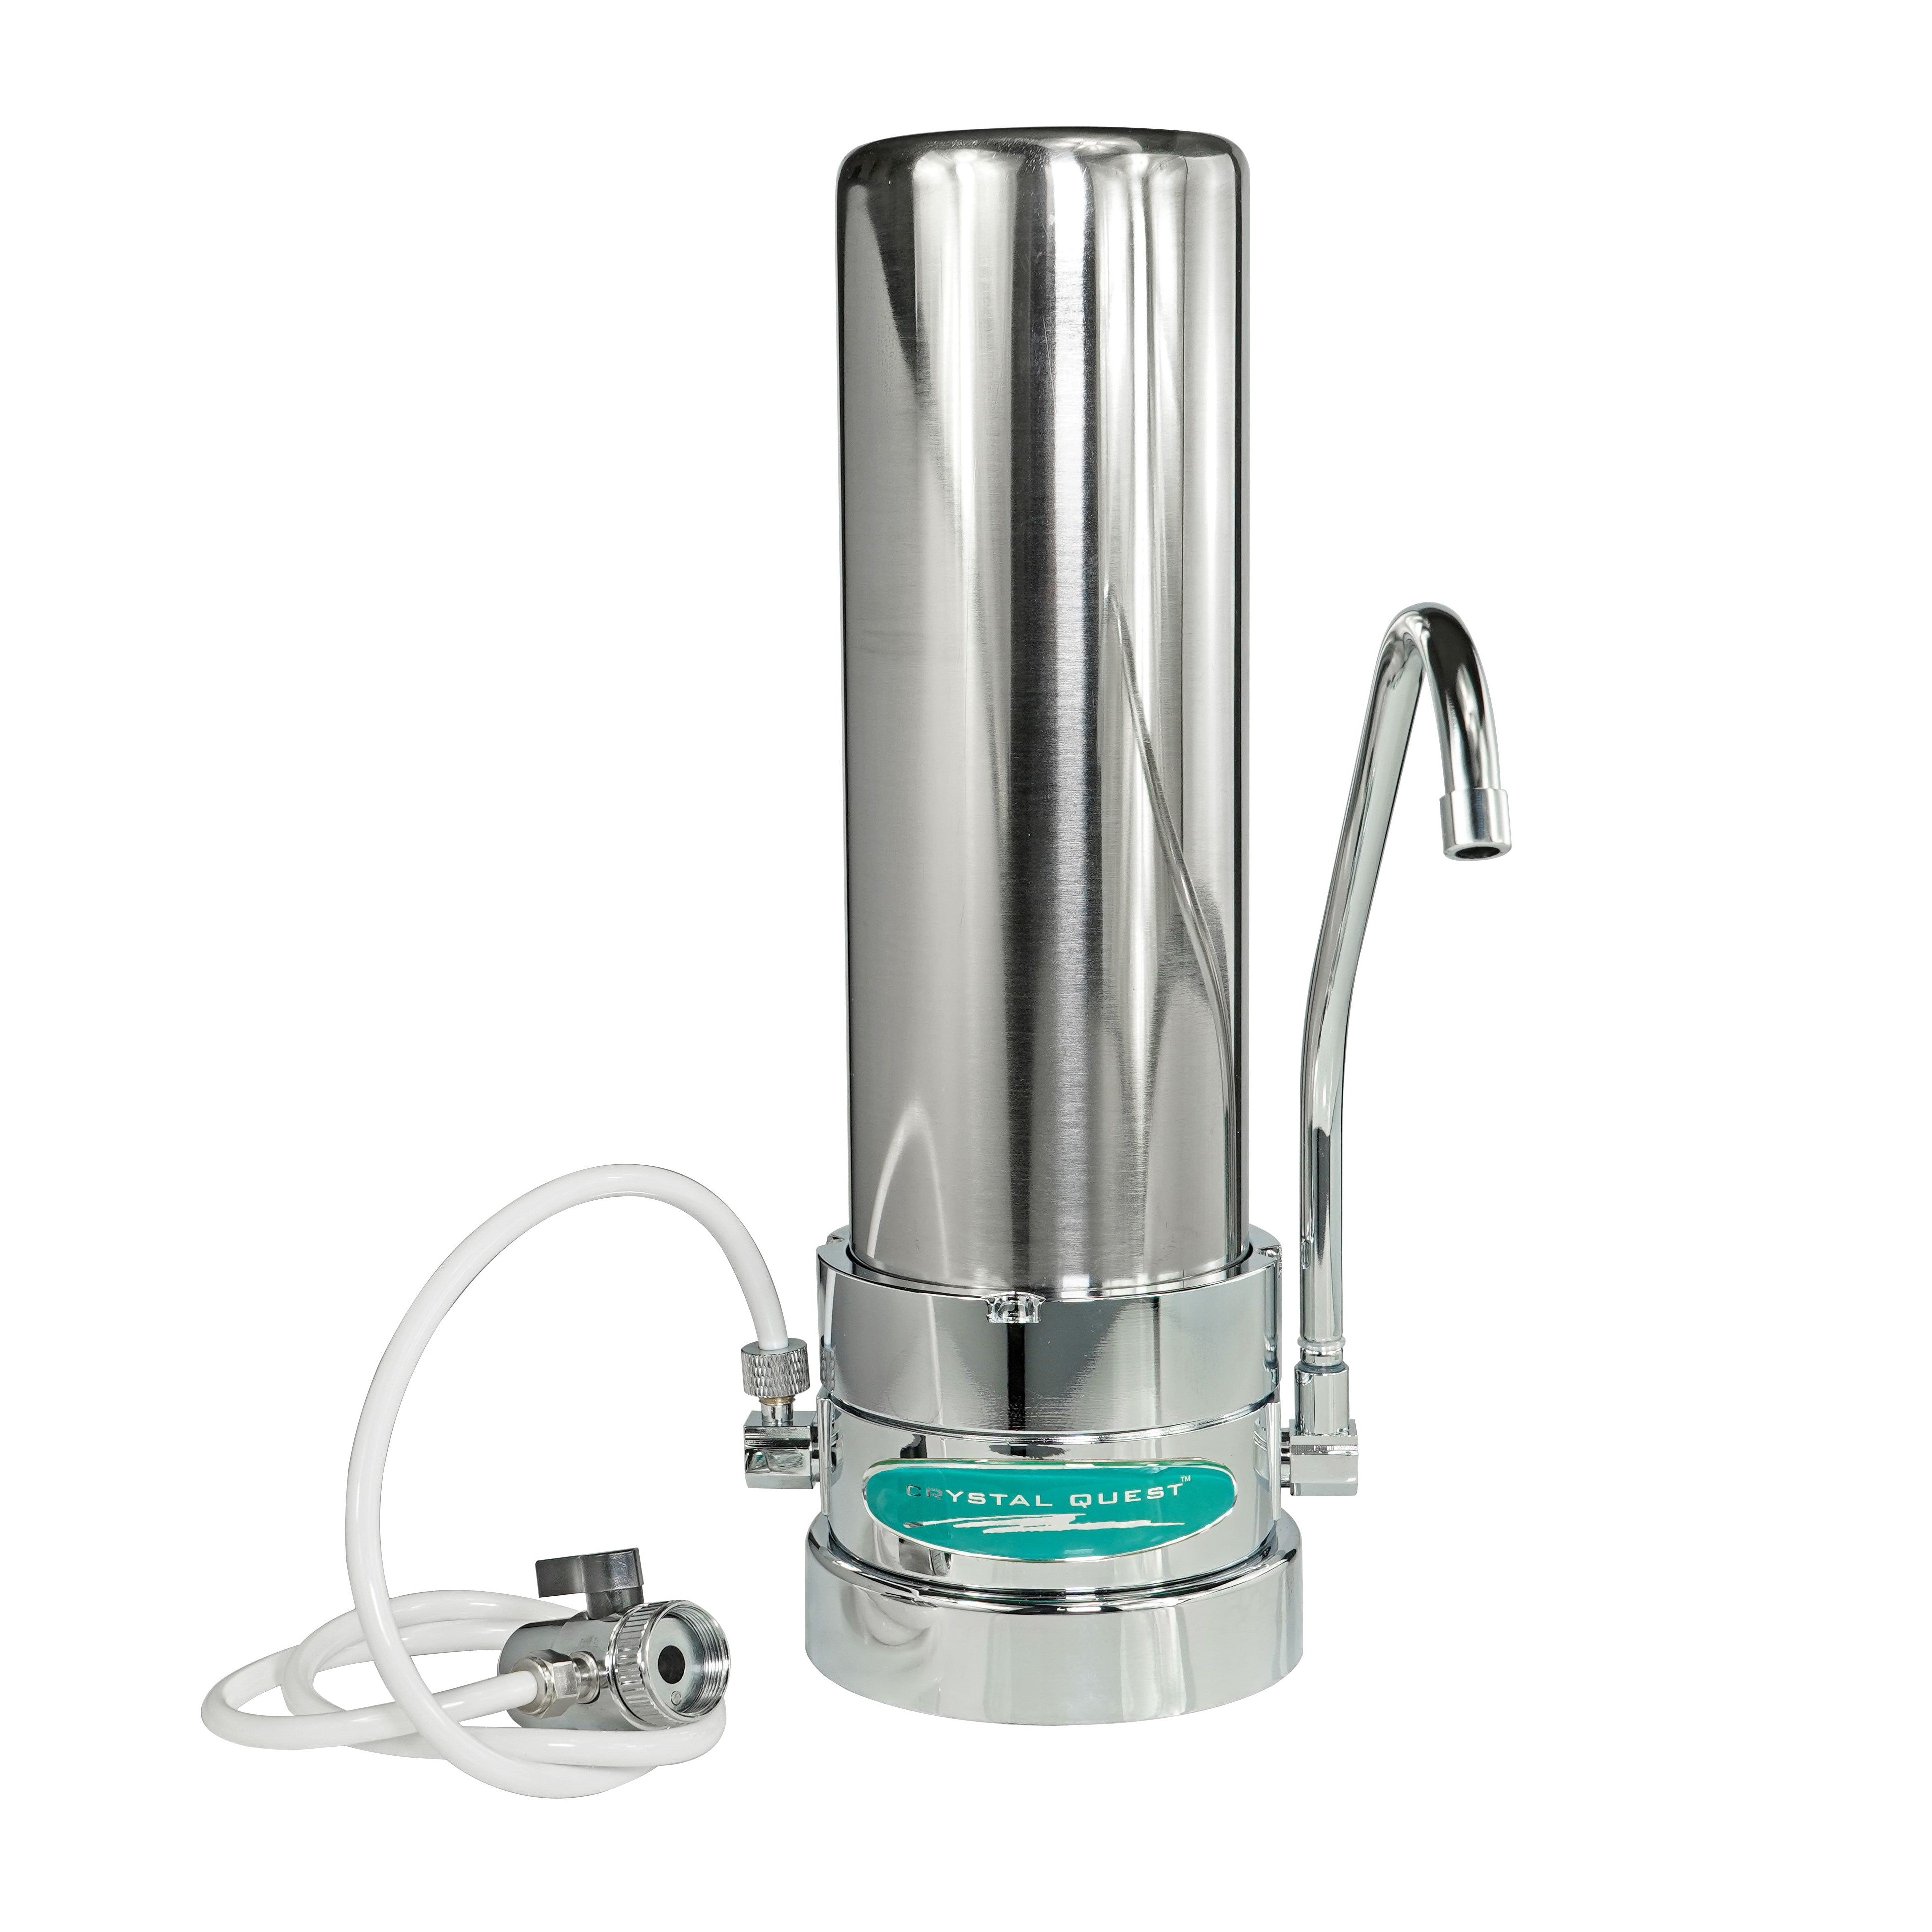 Stainless Steel Nitrate Removal | SMART Single Cartridge Countertop Water Filter System - Countertop Water Filters - Crystal Quest